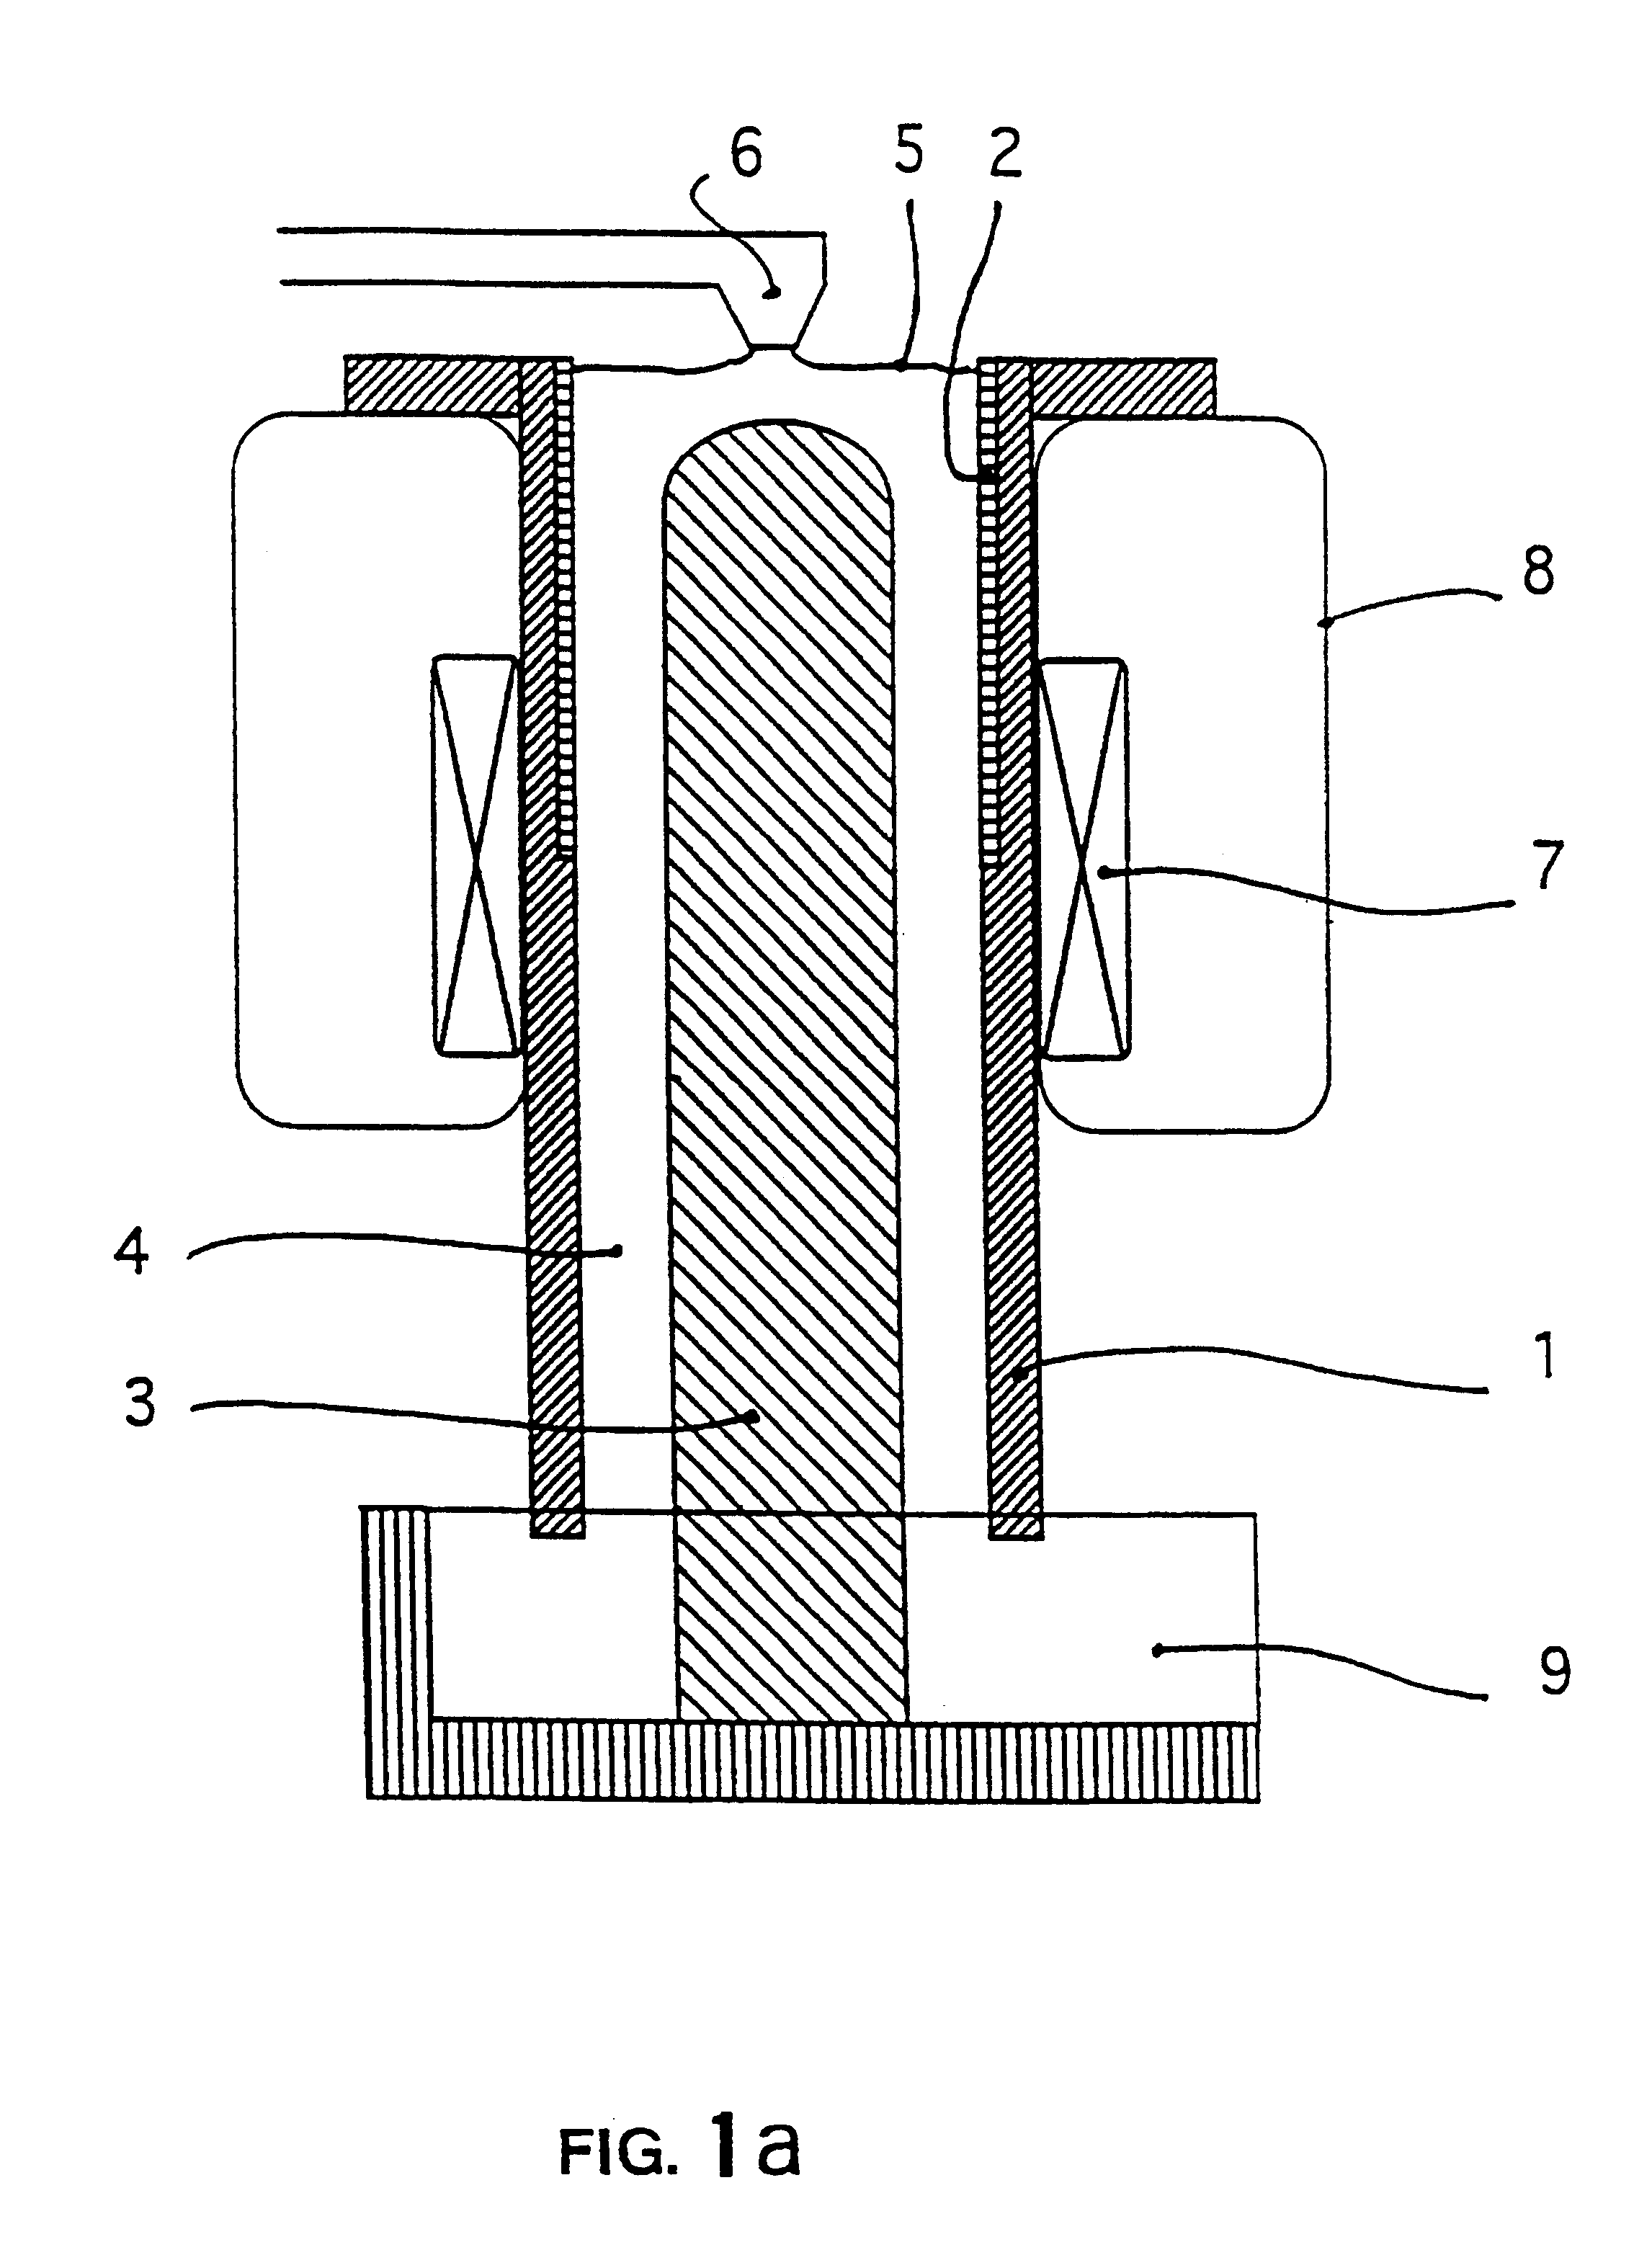 Method and device for separating particles from an electrically conductive liquid flow using electromagnetic forces